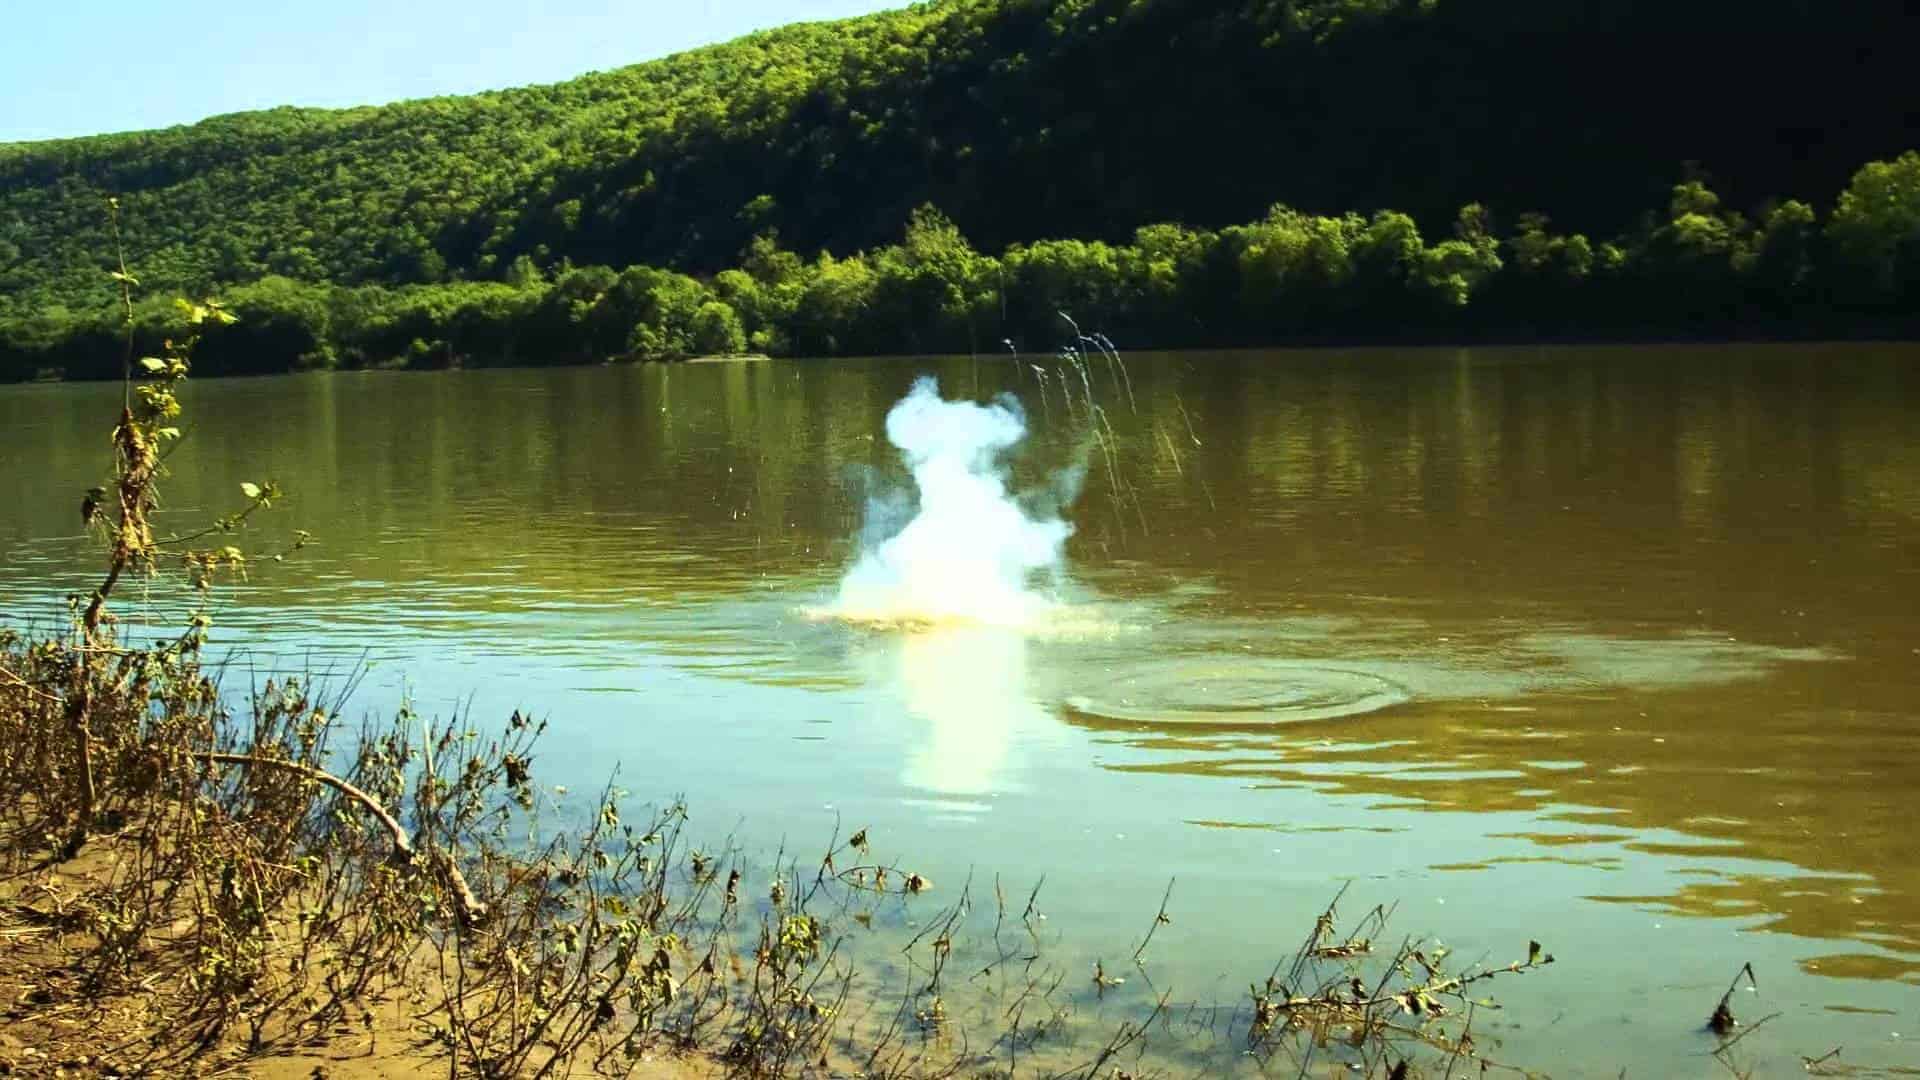 What happens when you throw a pound of sodium into the river?